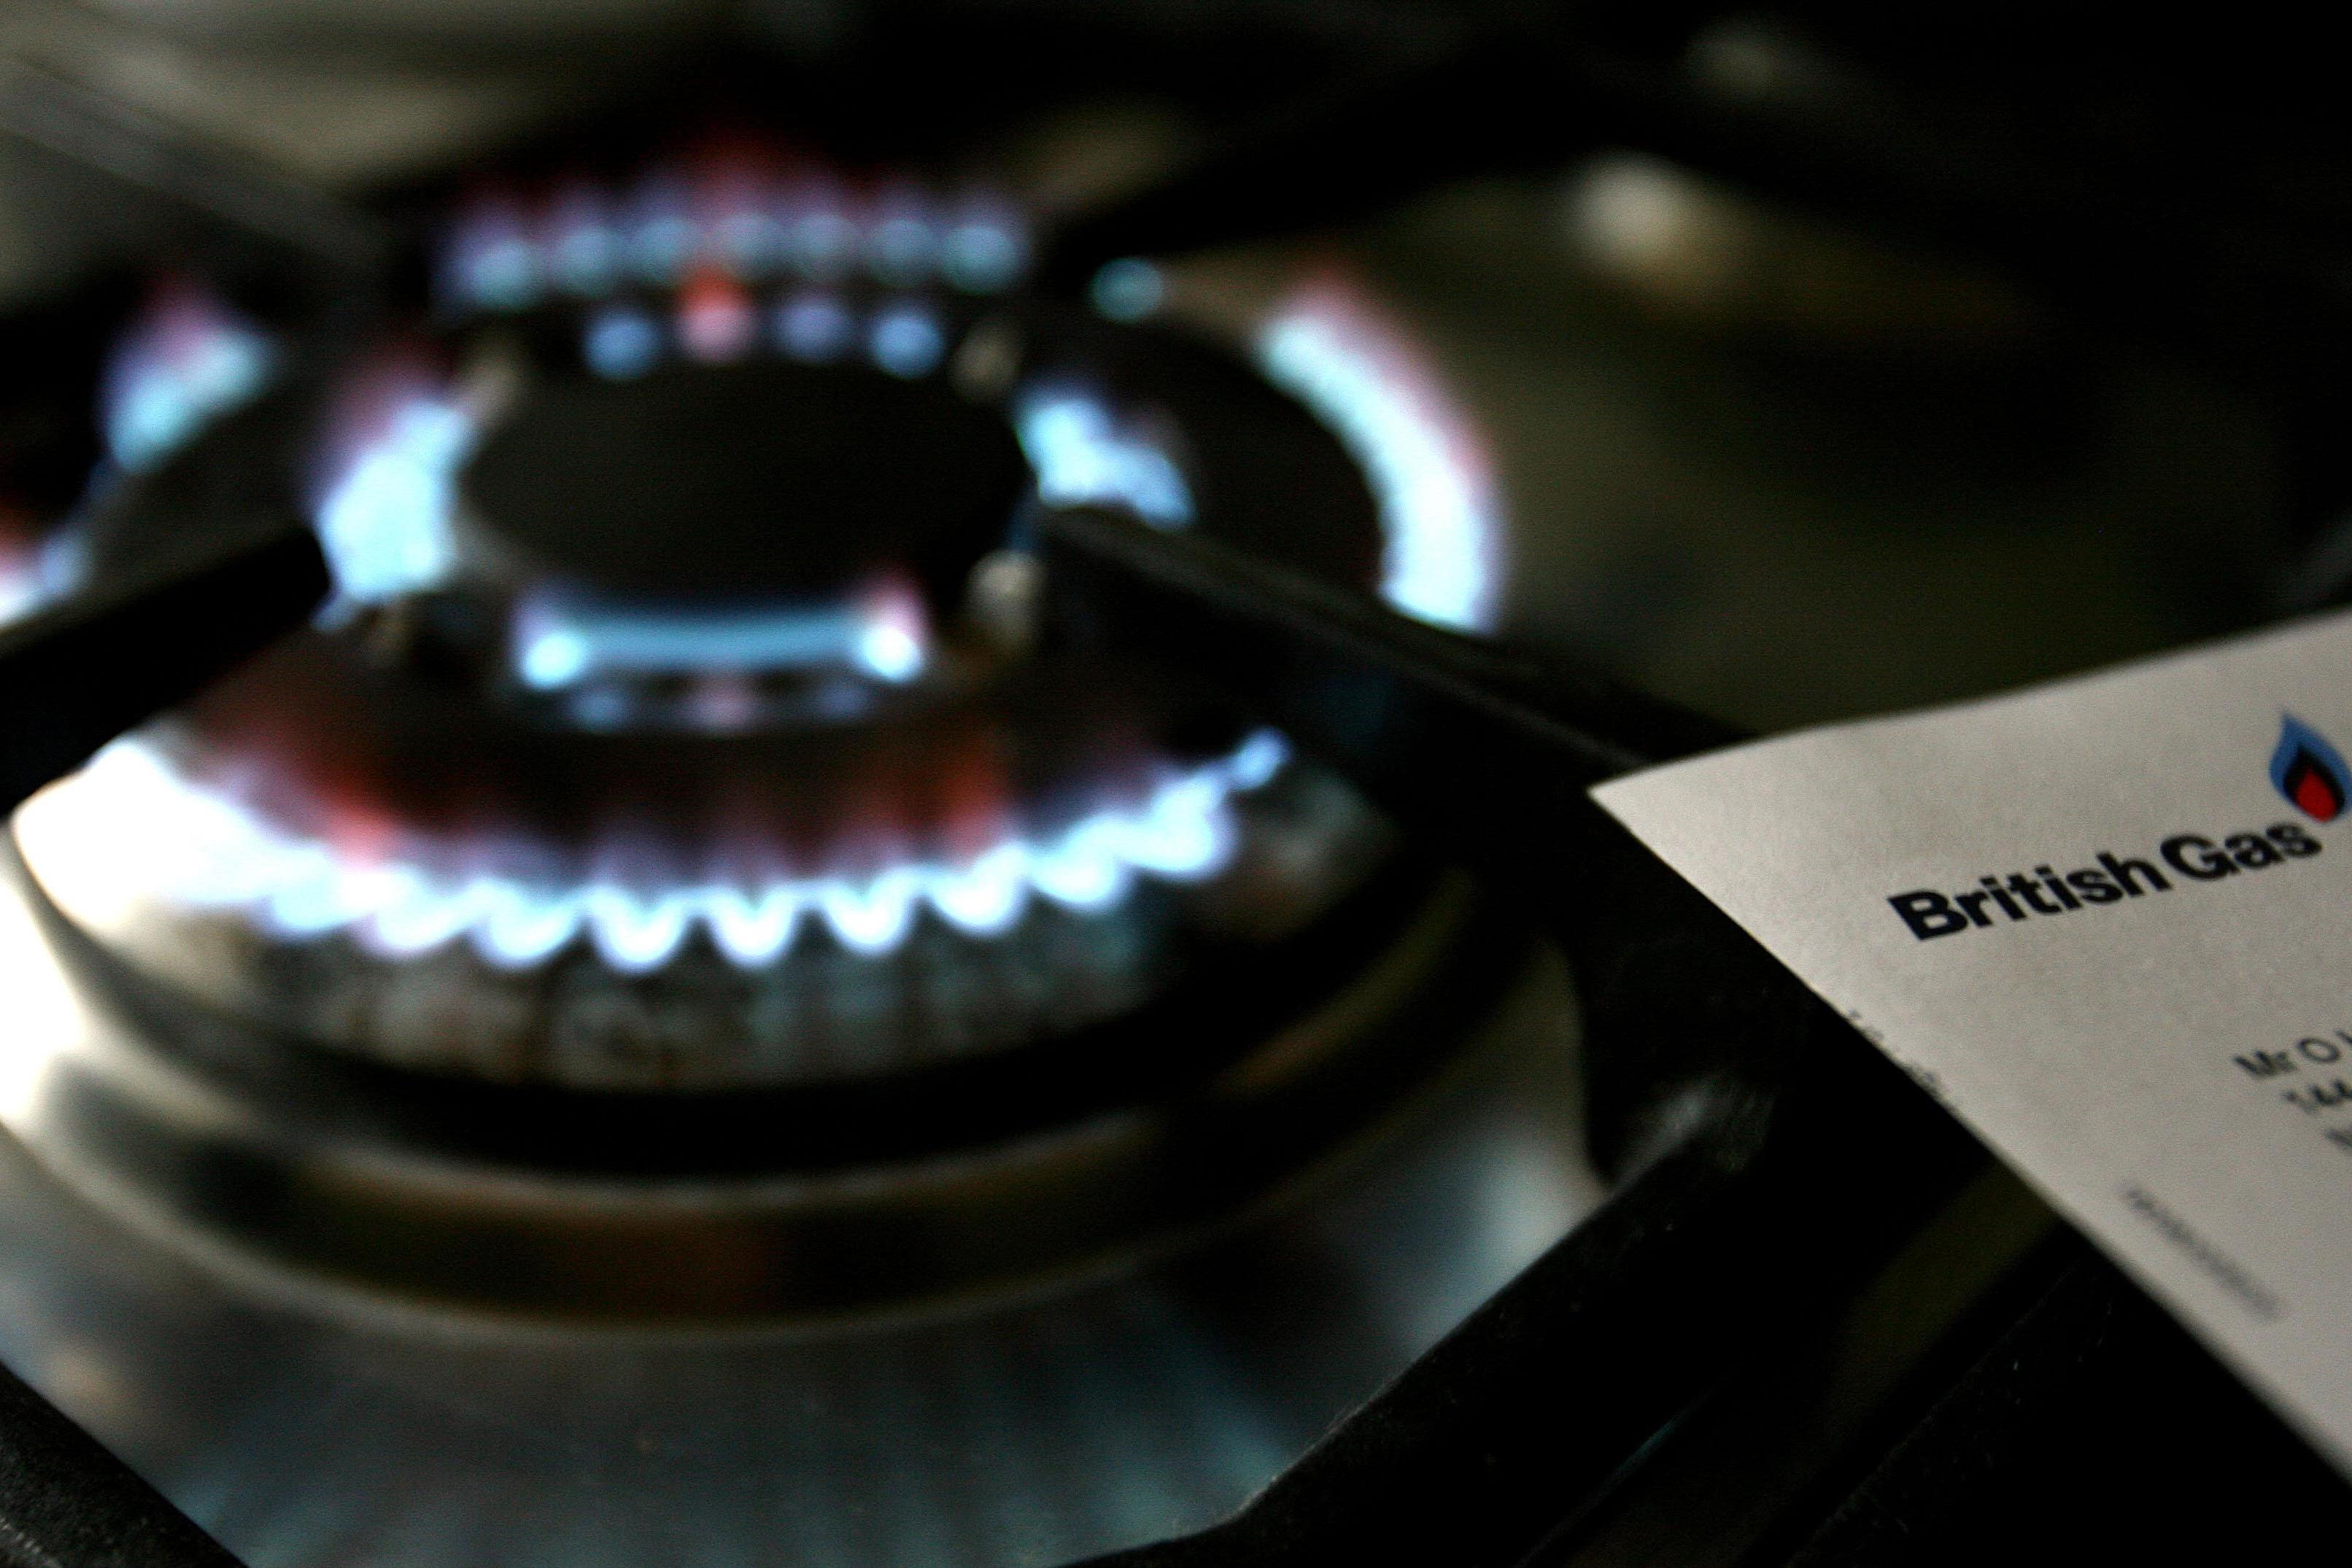 British Gas has announced it will stop applying for court warrants to enter customers’ homes to fit prepayment meters